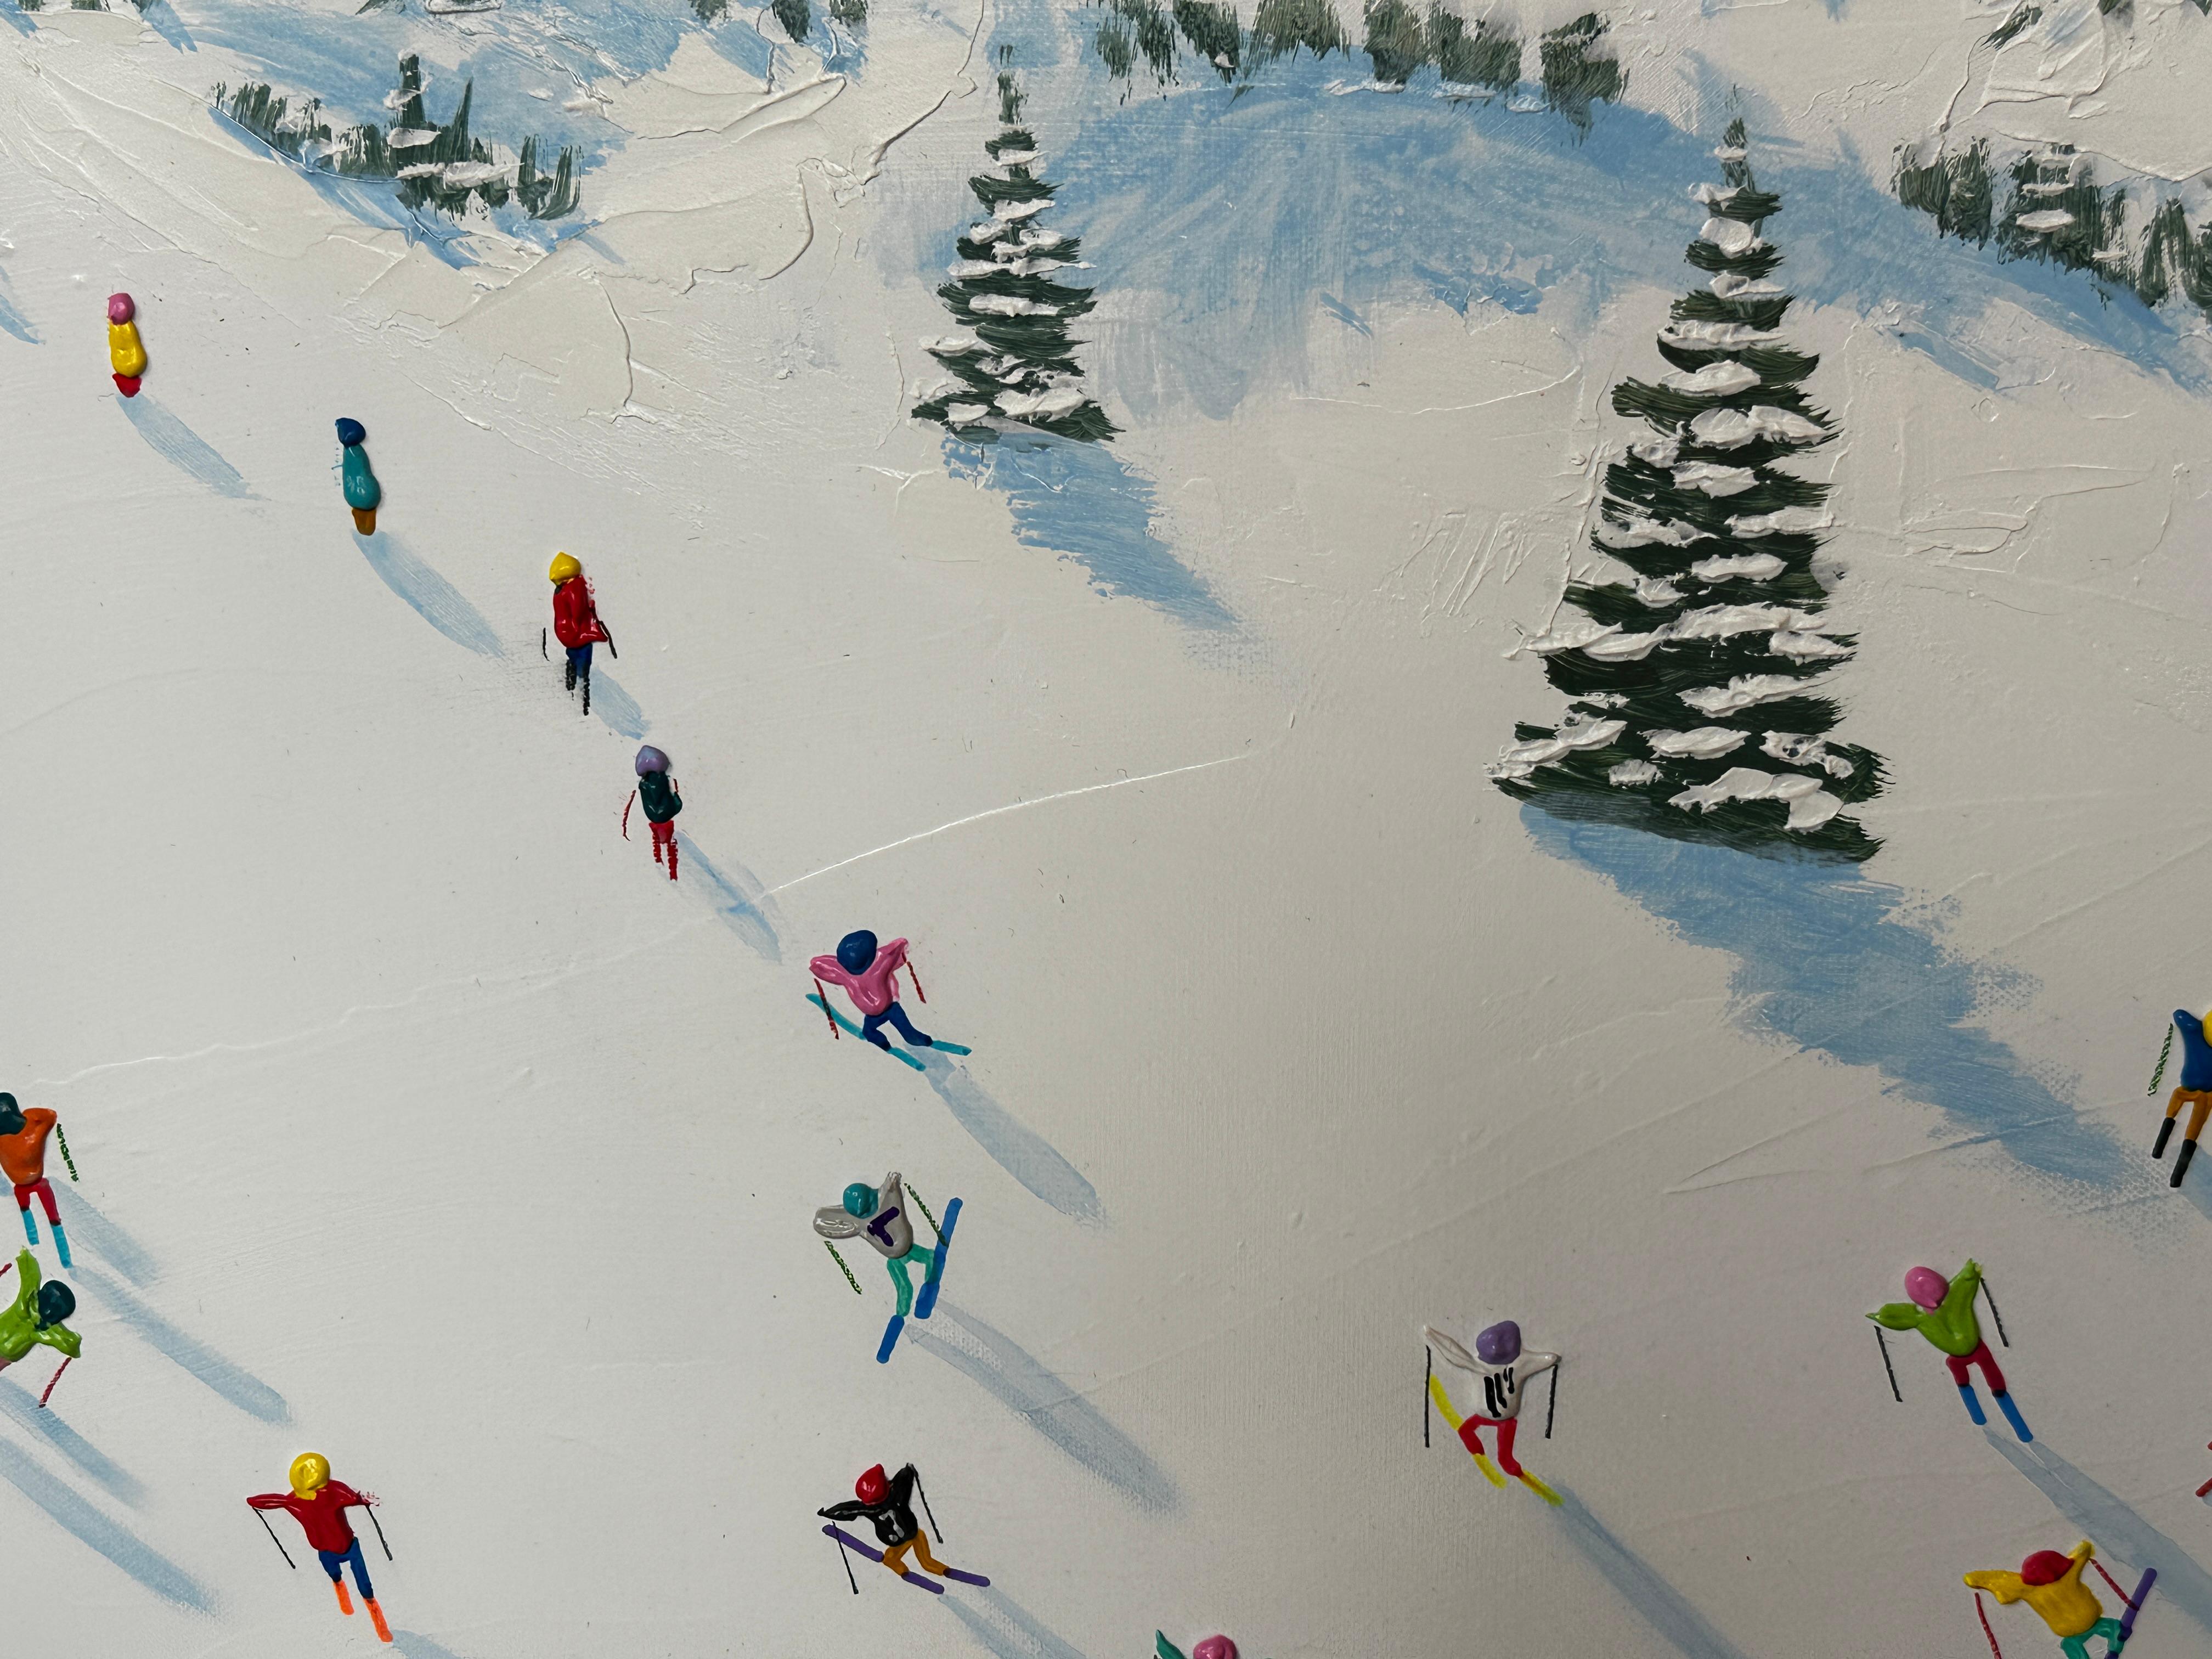 'Mountain Adventures' is a fun and vibrant contemporary 3D painting of skiers, mountains, trees and figures by Max Todd. Inspired by skiing holidays Todd has created a work that makes you dream of the slopes! 

Max Todd uses contemporary techniques